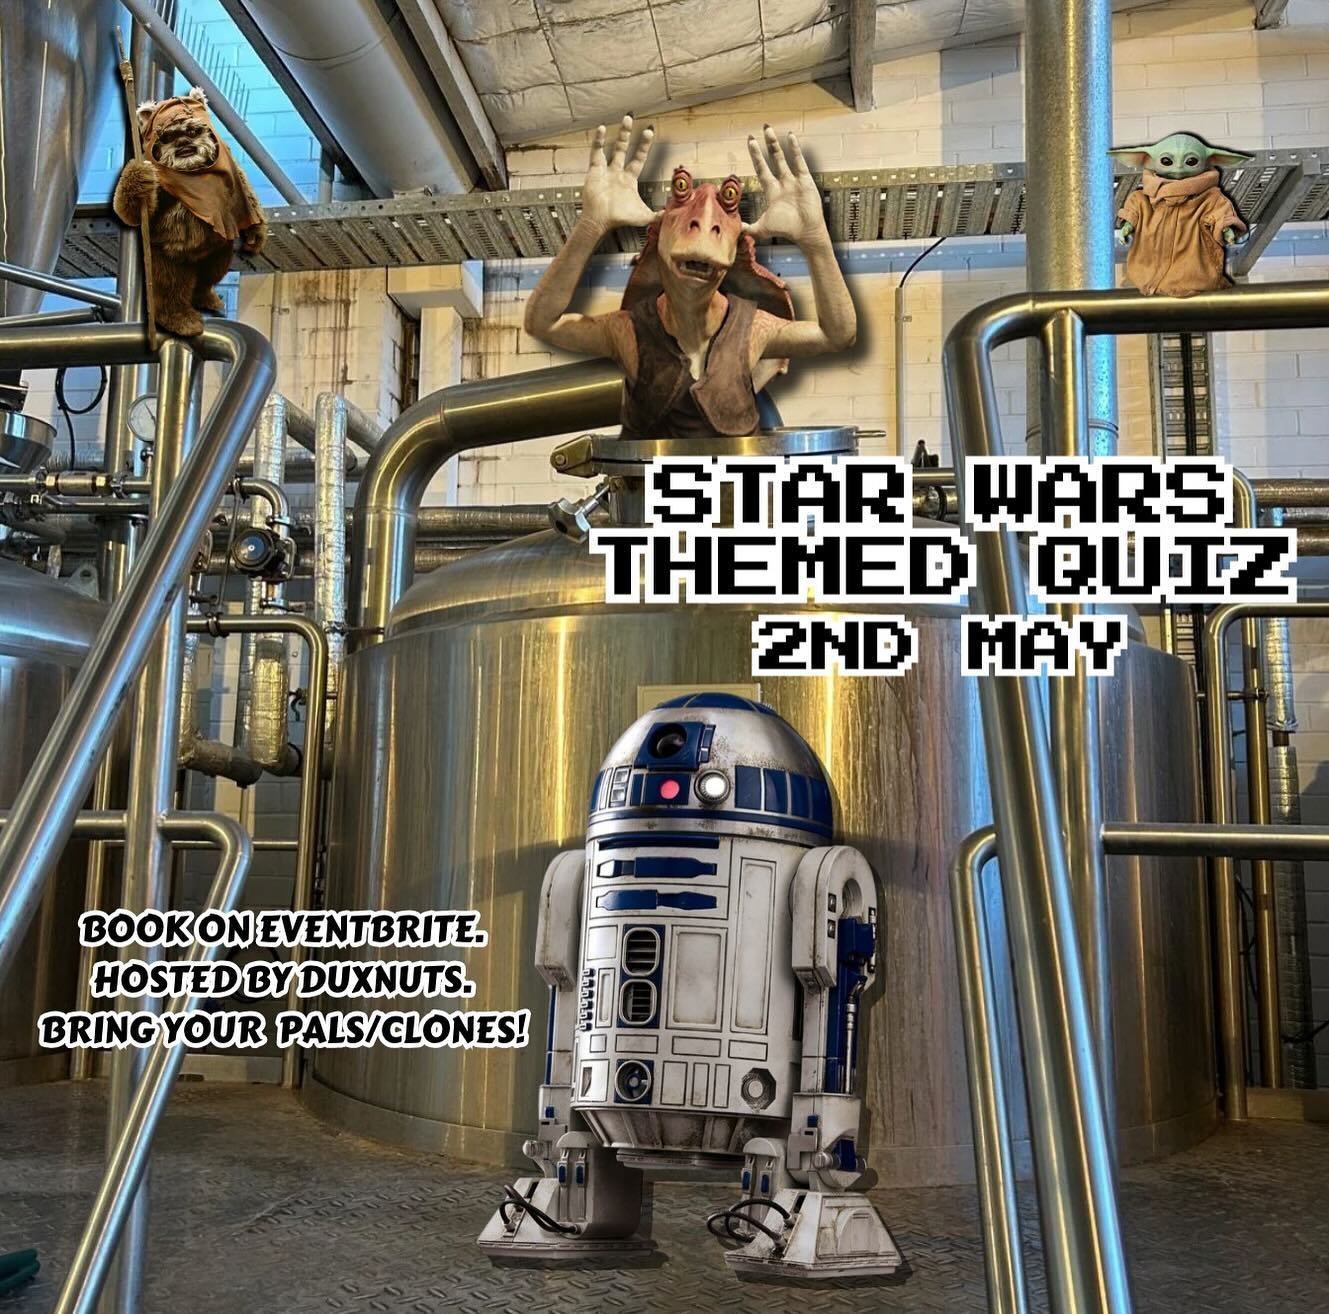 BUSY LIL&rsquo; MAY AHEAD 😘

Our first couple of events we&rsquo;d like to announce in May are:
our Star Wars Themed Quiz w/ @dux_nuts AND Mother&rsquo;s Day!

Bring your wookie, stormtrooper &amp; ewok loving pals down to Seasonal for the annual St